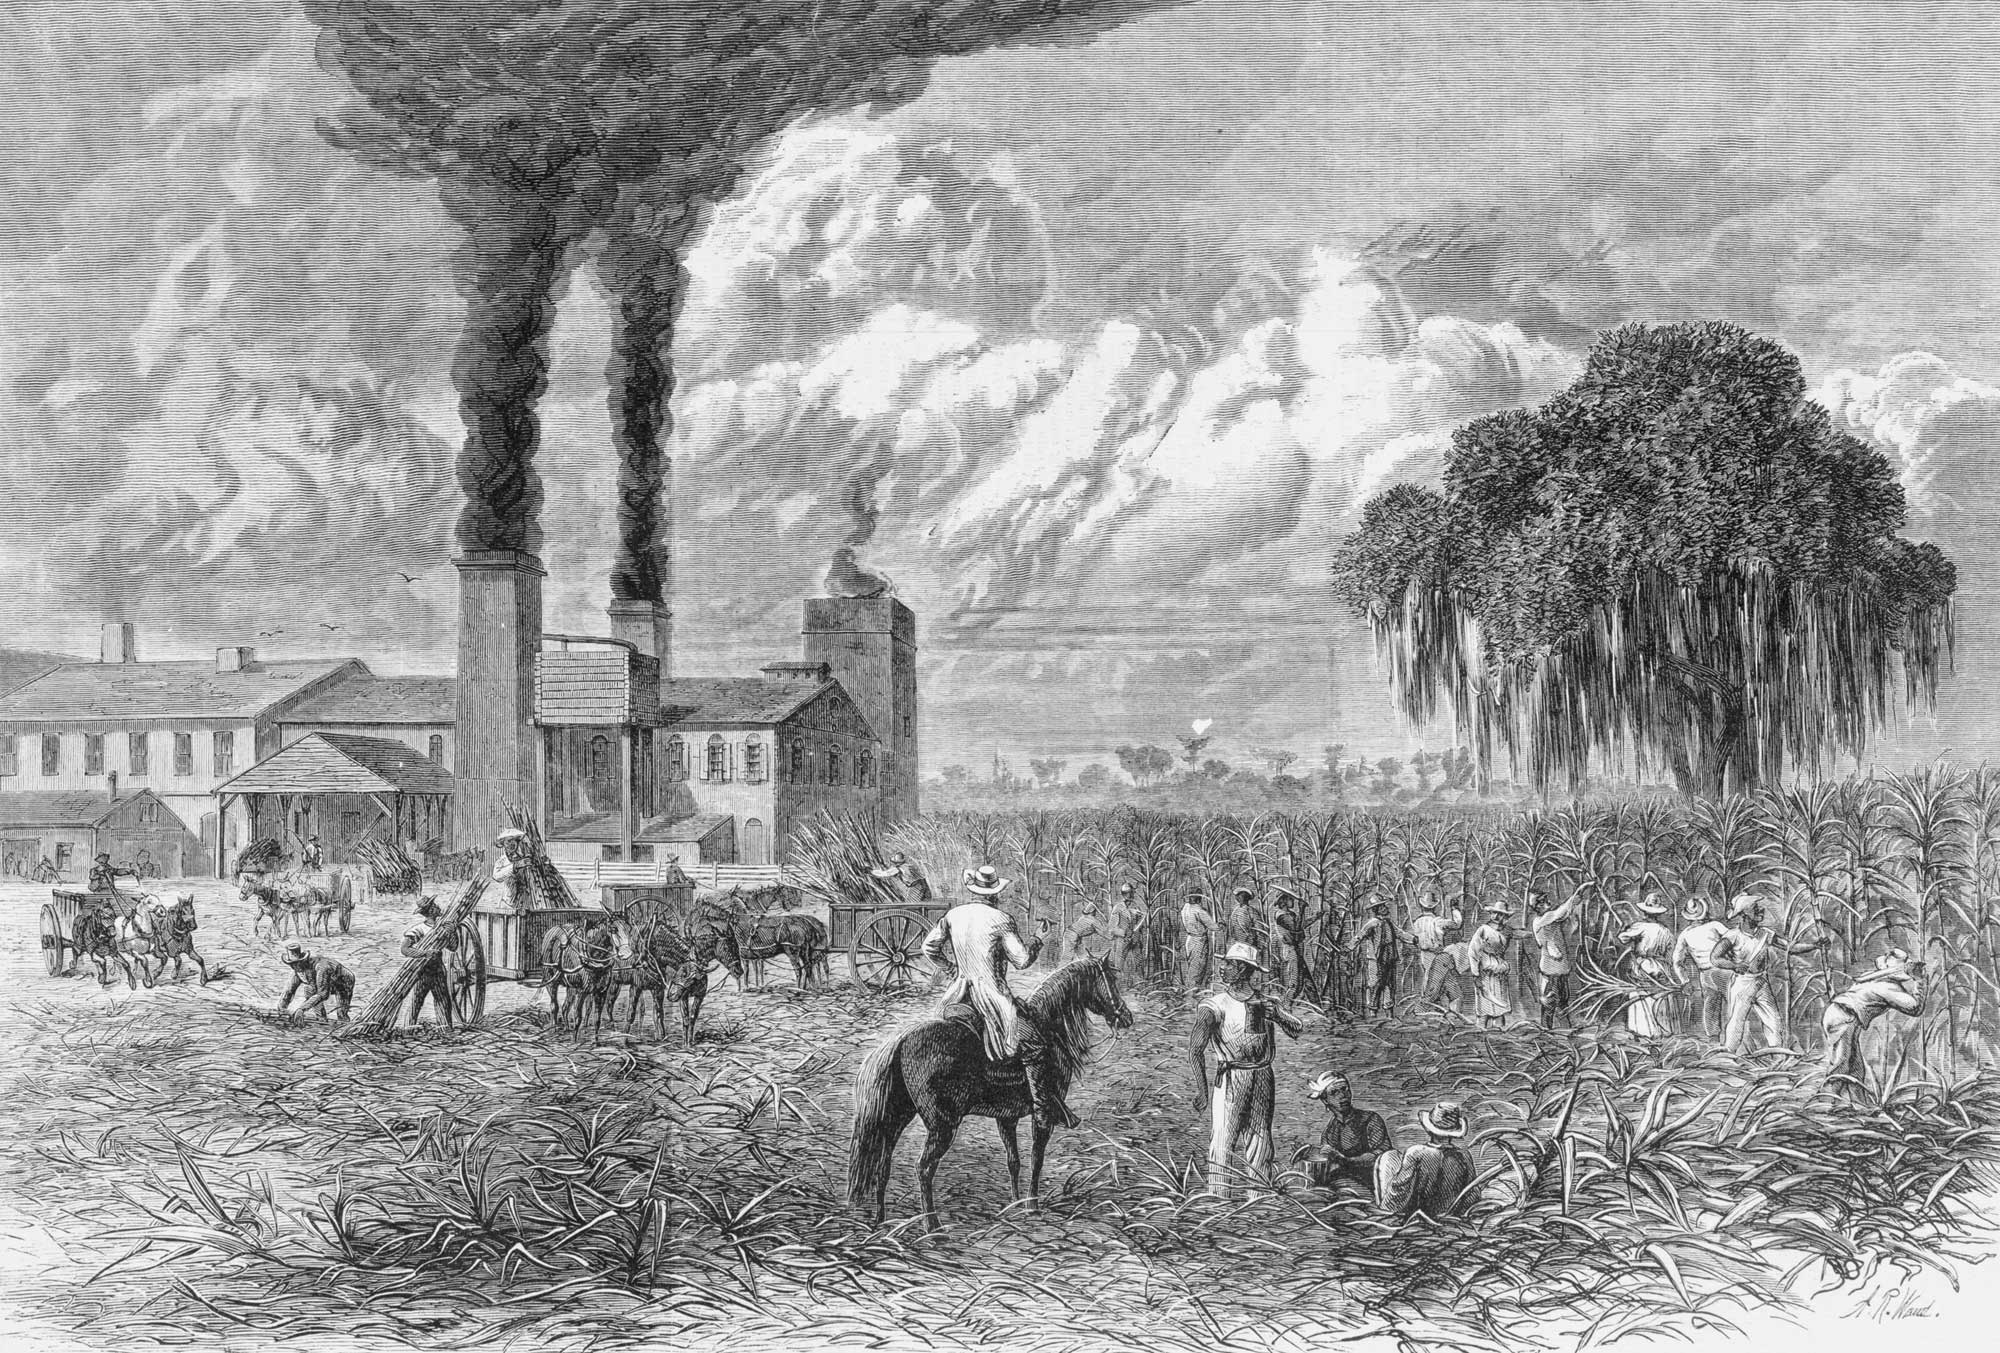 Black and white engraving showing sugar production in Louisiana, USA, ca. 1875. The engraving shows people in a field hand-harvesting sugarcane with knives. The harvesters are supervised by a man on a horse. In the background, people are loading cut sugarcane stalks onto horse-drawn wagons. The wagons are bringing the sugarcane to the sugar mill, which is shown in the left background. The sugar mill is a building with two smokestacks producing heavy black smoke.